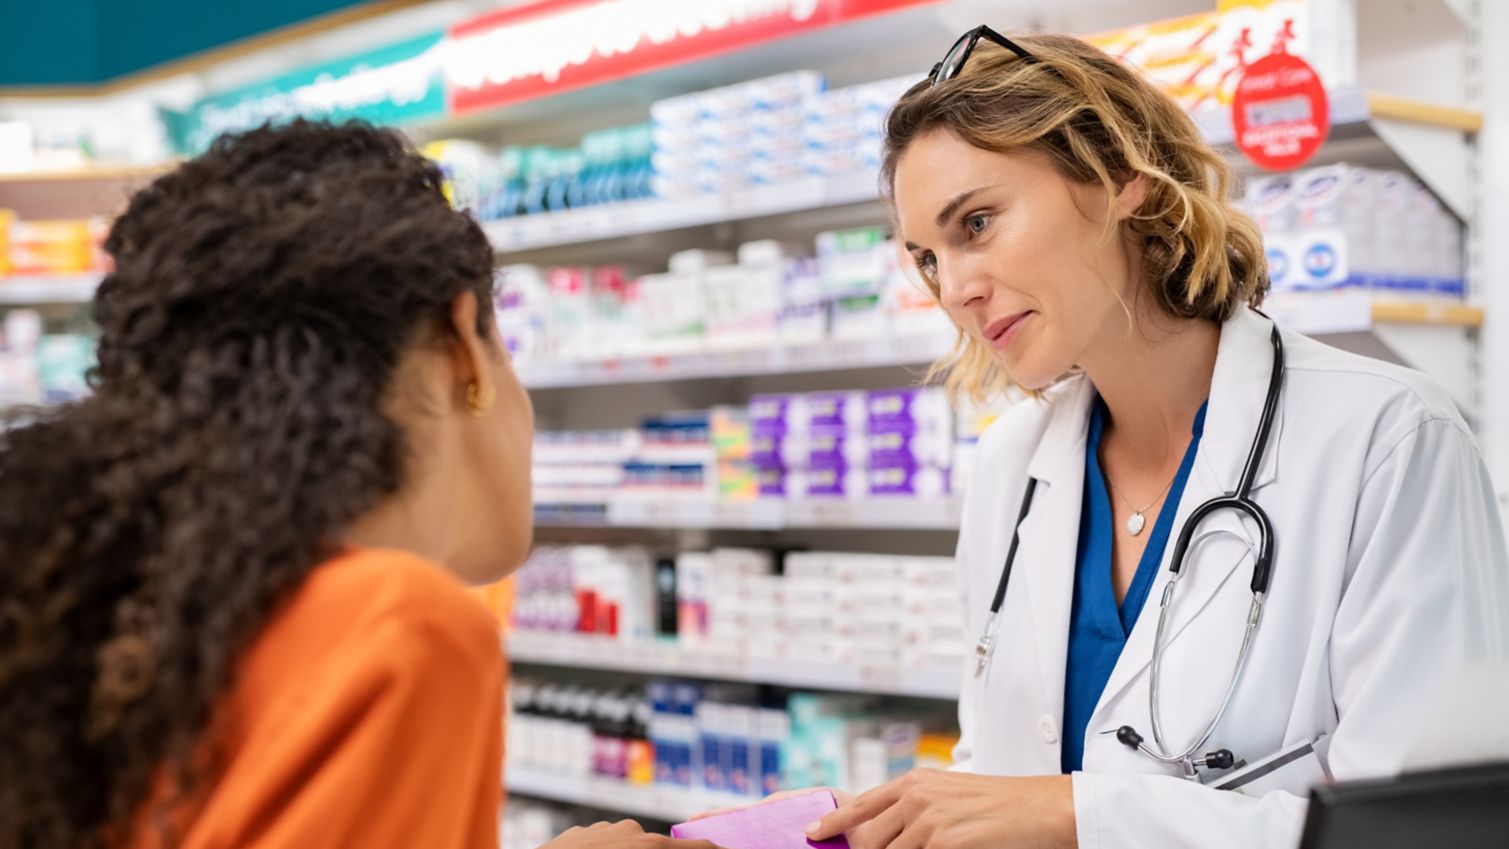 Pharmacist discusses medication with patient